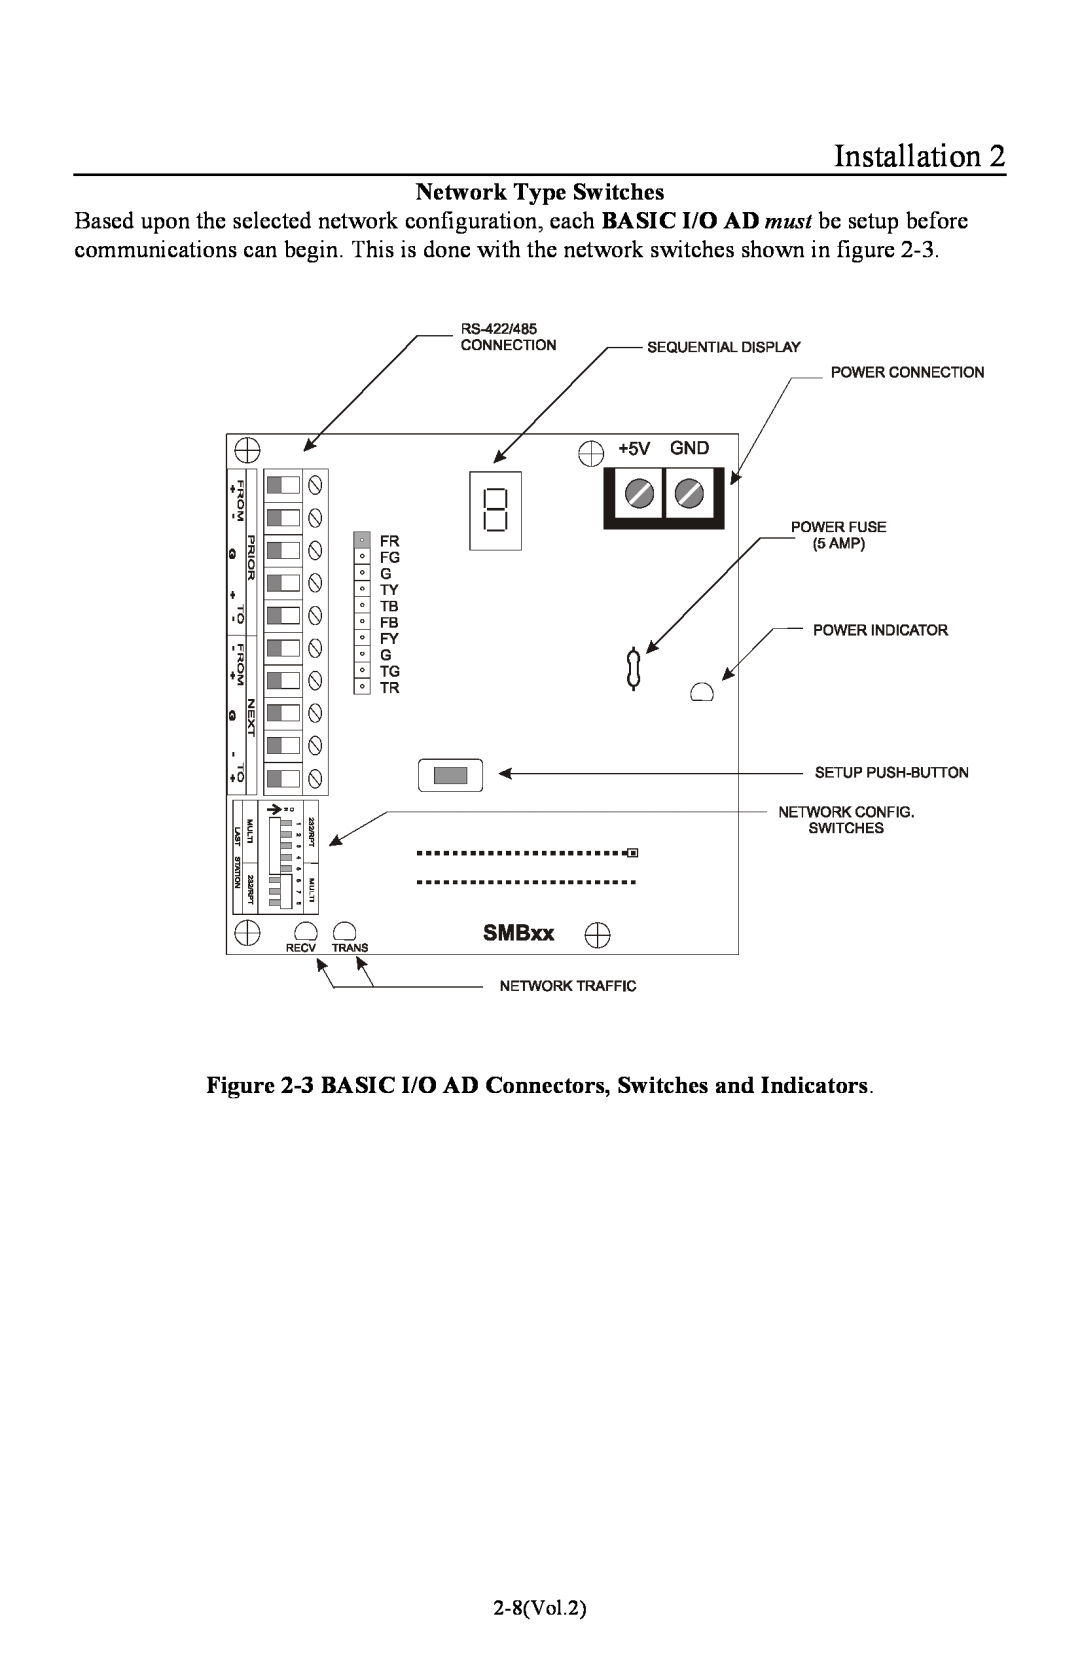 I-O Display Systems Basic I/O Product manual Installation, Network Type Switches, 2-8Vol.2 